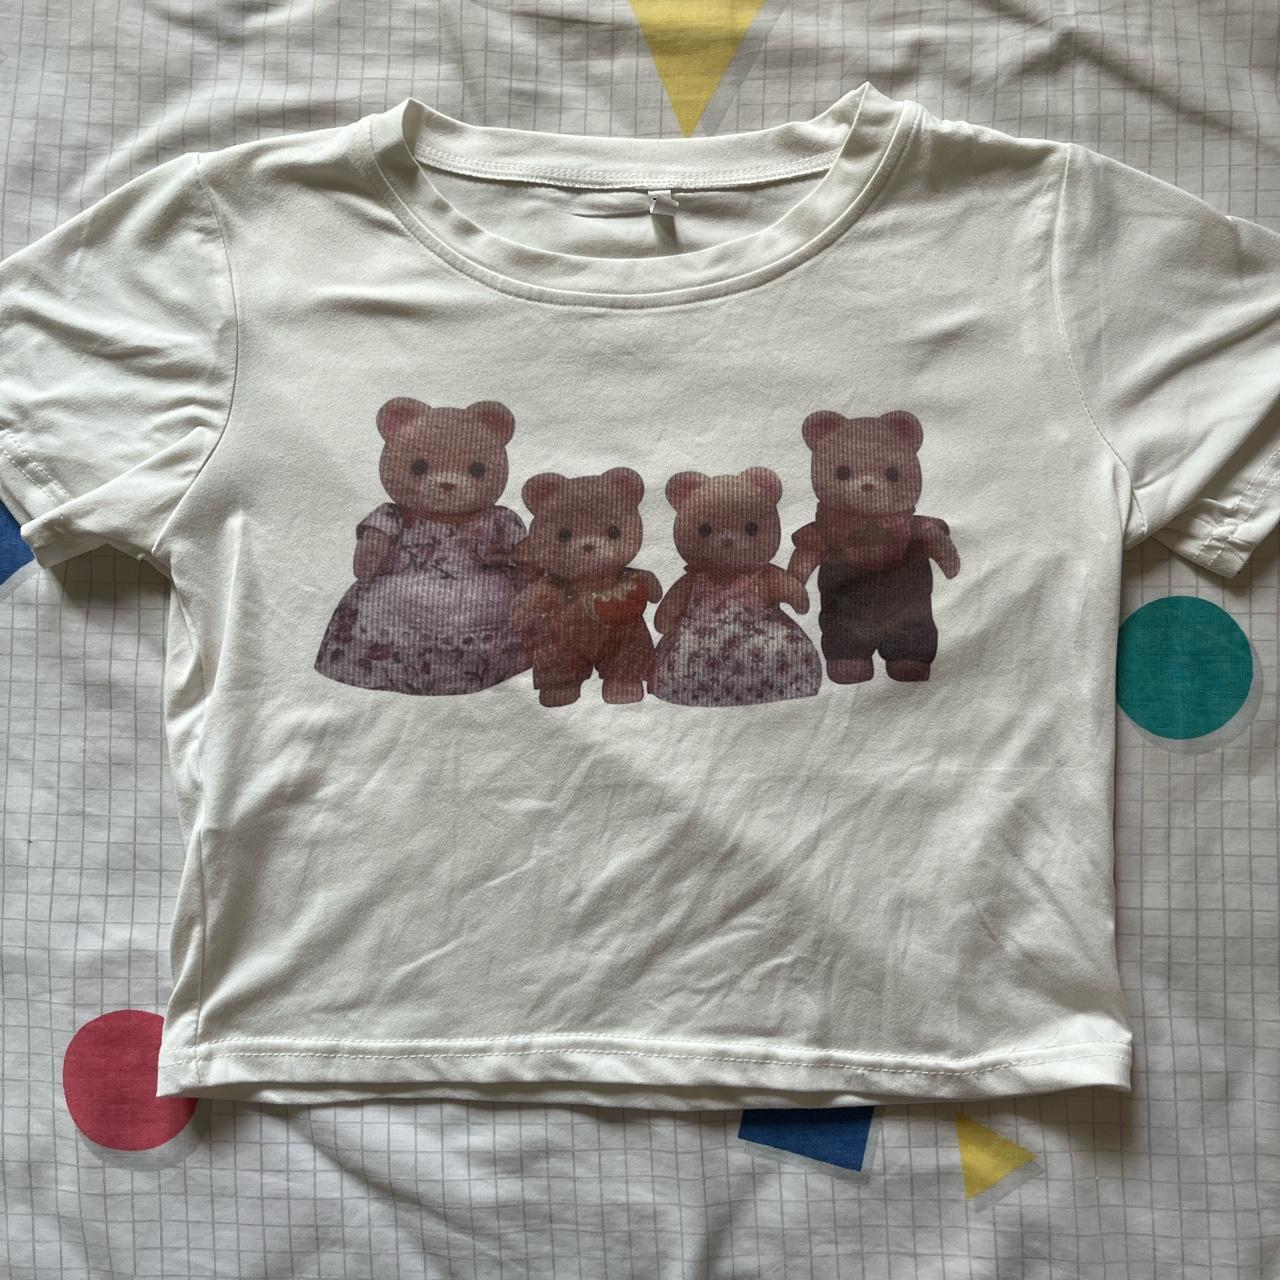 Calico Critters Tshirt stretchy material fits... - Depop